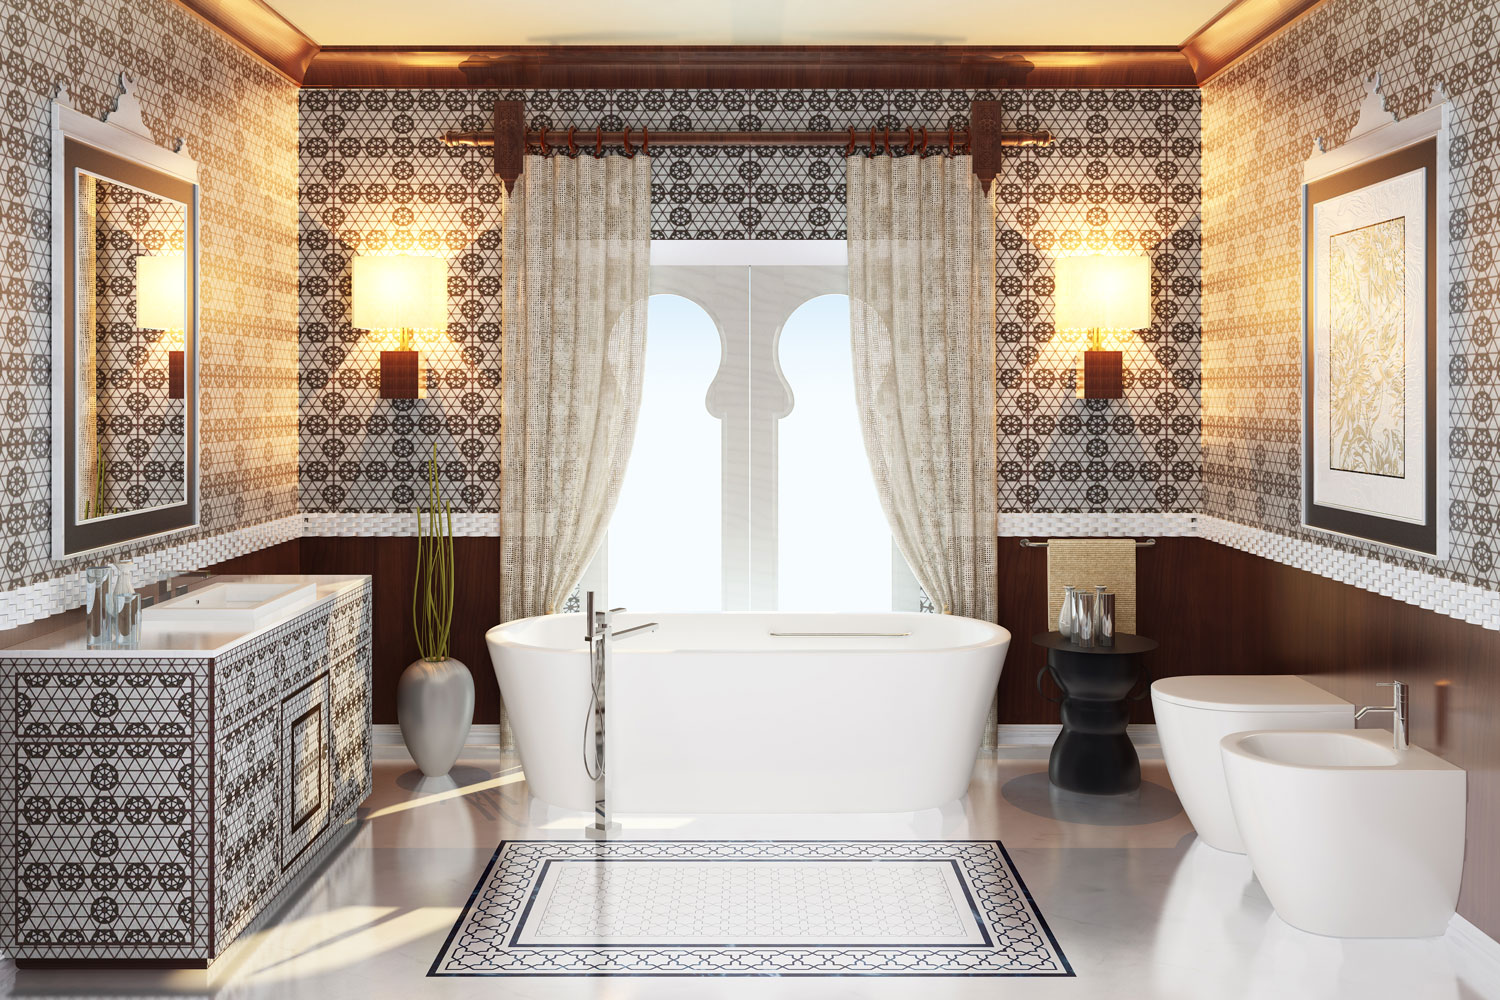 Moroccan inspired modern bathroom wtih ogee patterns on the tiles and flooring